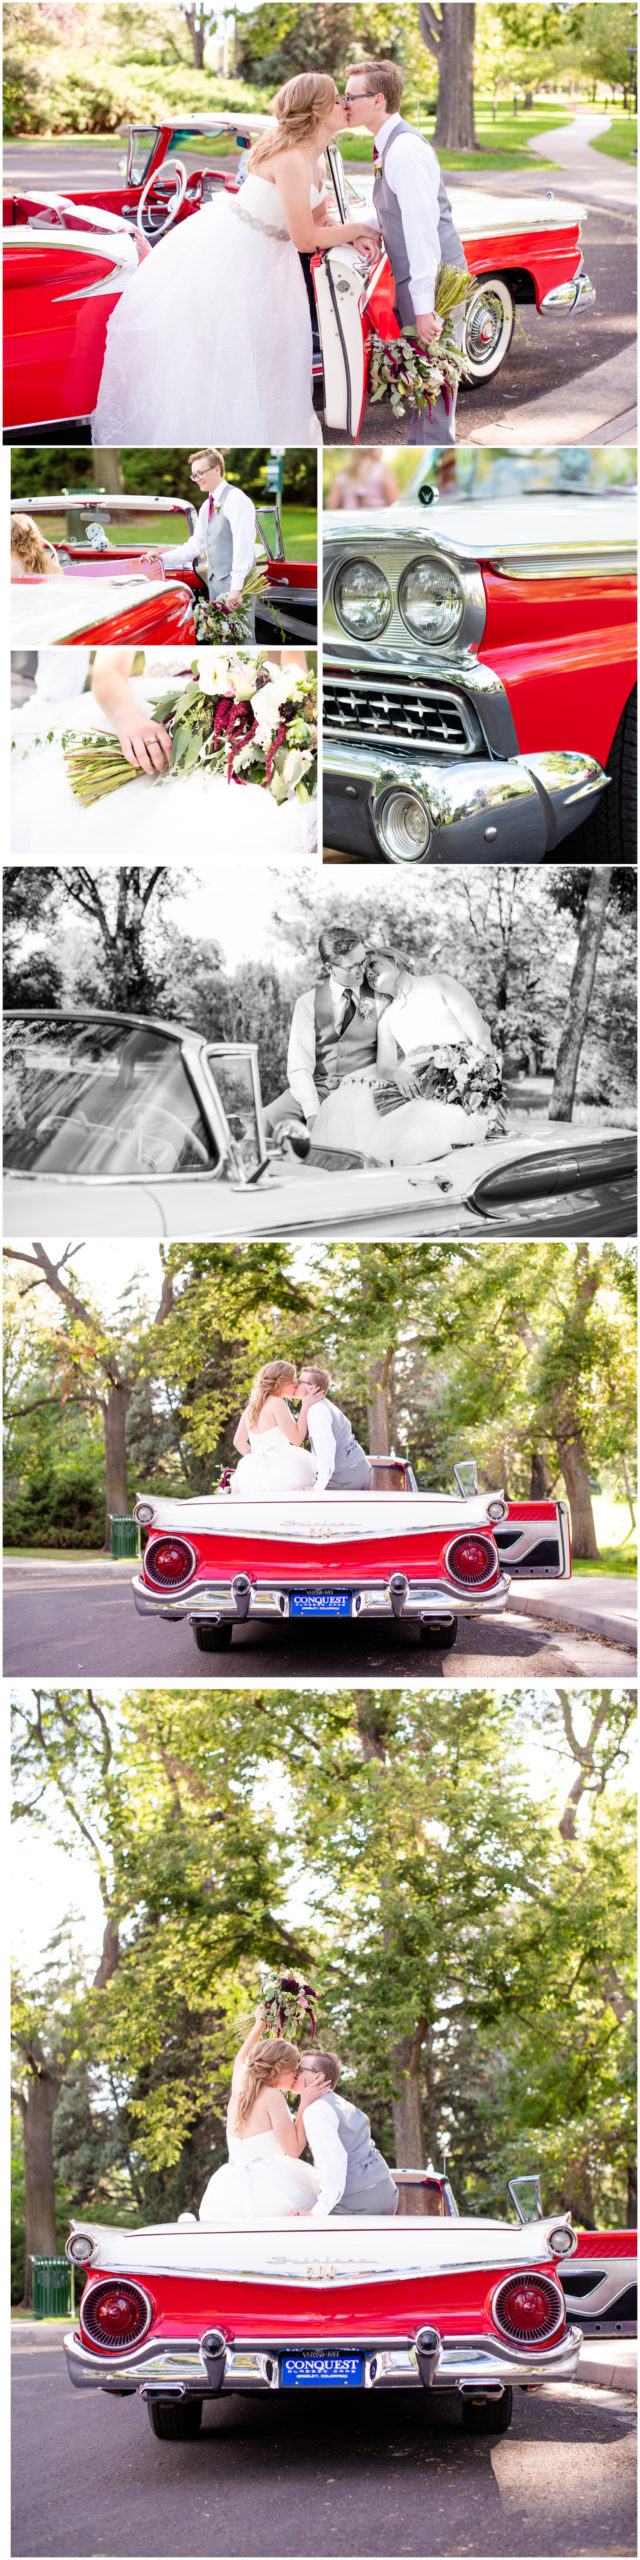 Wedding Transportation for Bride - Red Ford Skyliner convertible by Conquest Classic Cars of Greeley  | Greeley Armory Wedding - Britni Girard Photography - Colorado Wedding and Lifestyle Photography